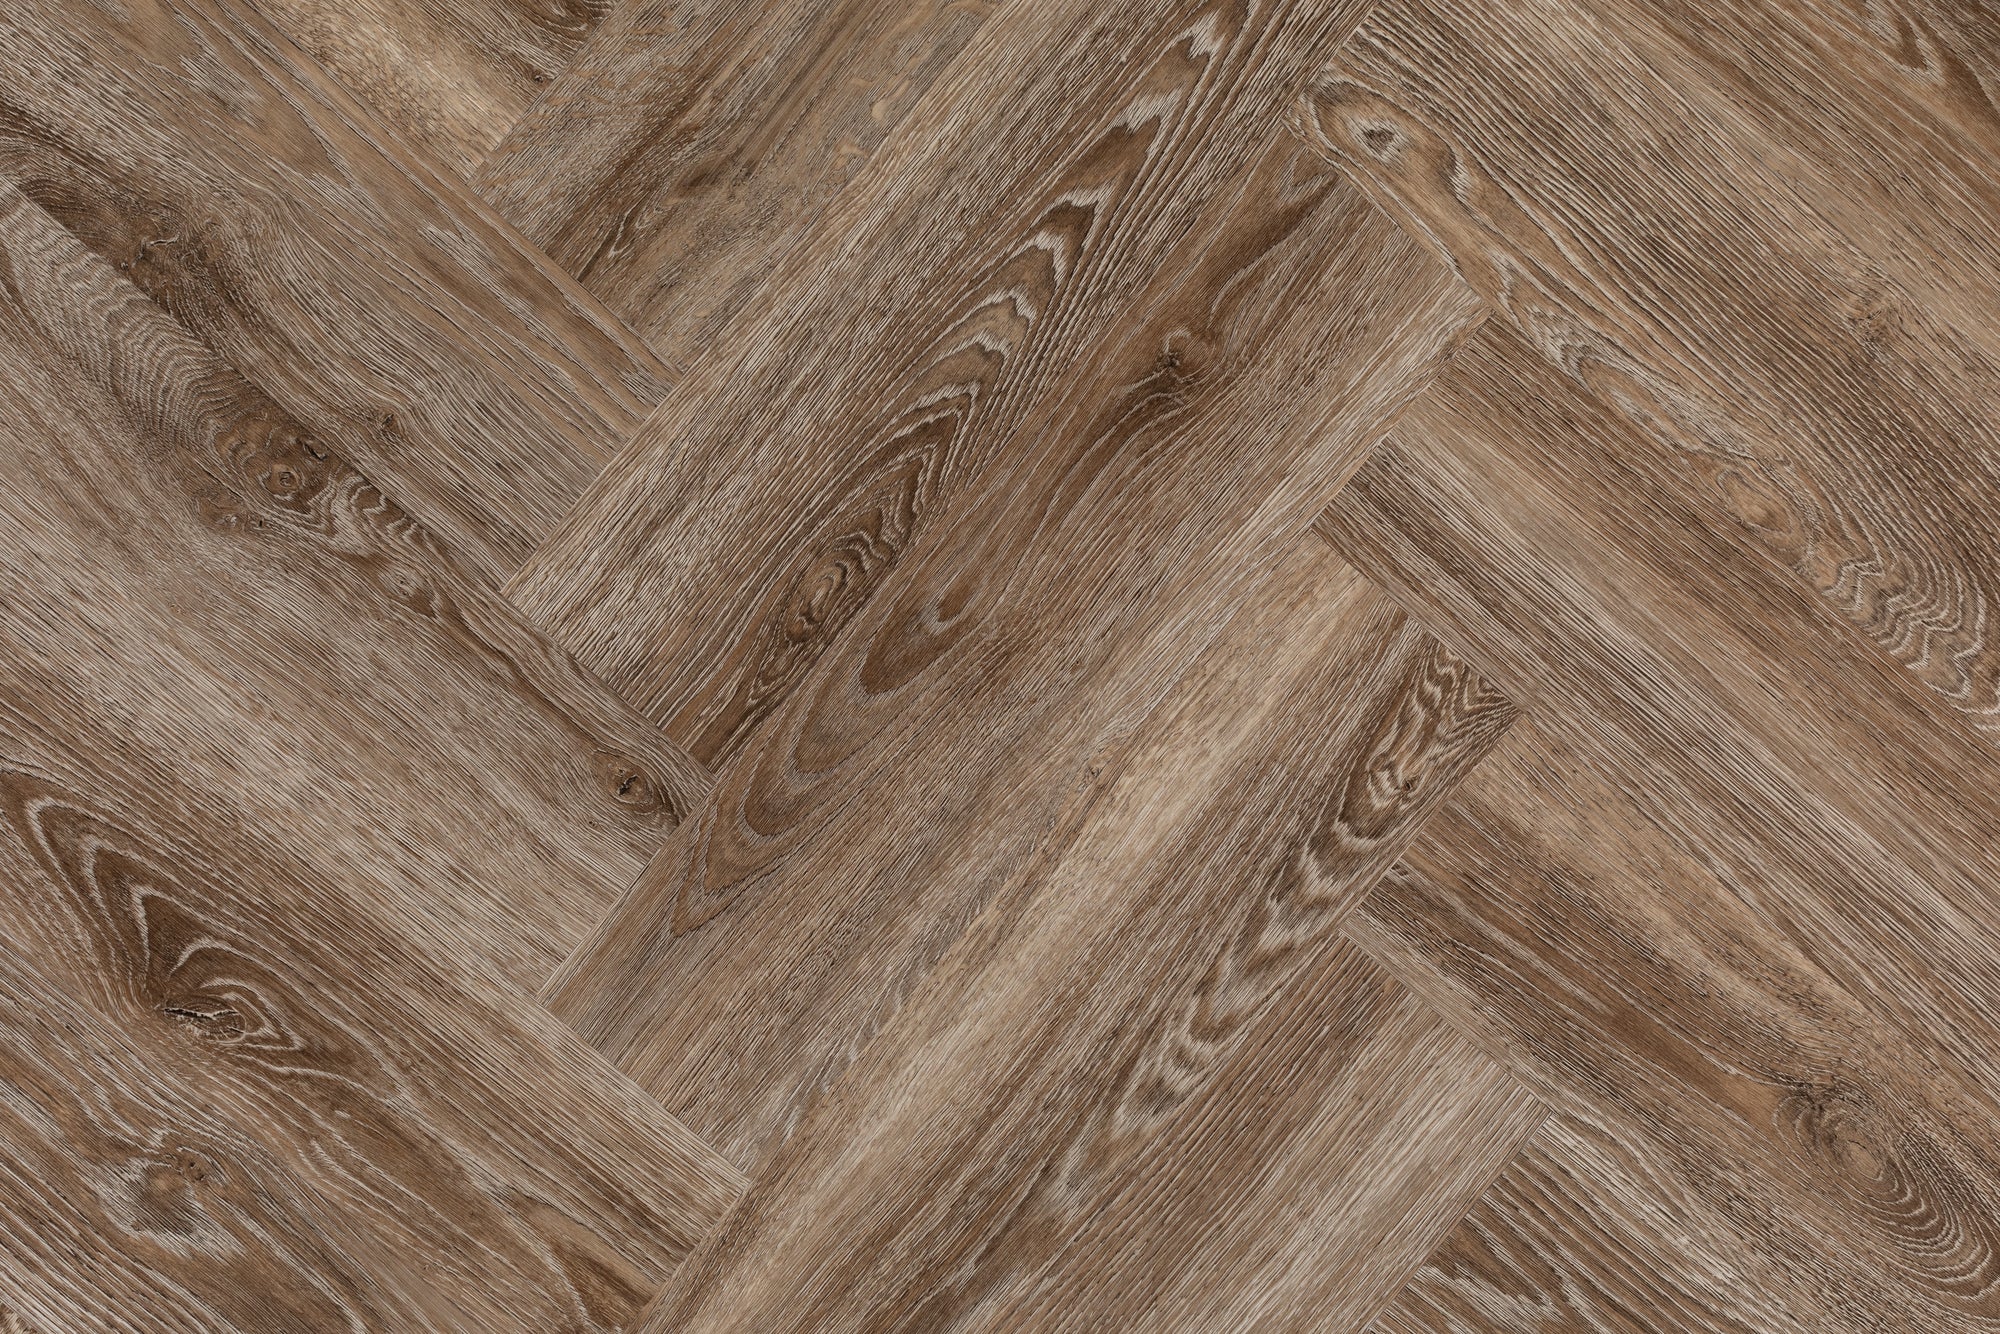 Pure Oyster Glue Down herringbone vinyl plank from our Herringbone collection 